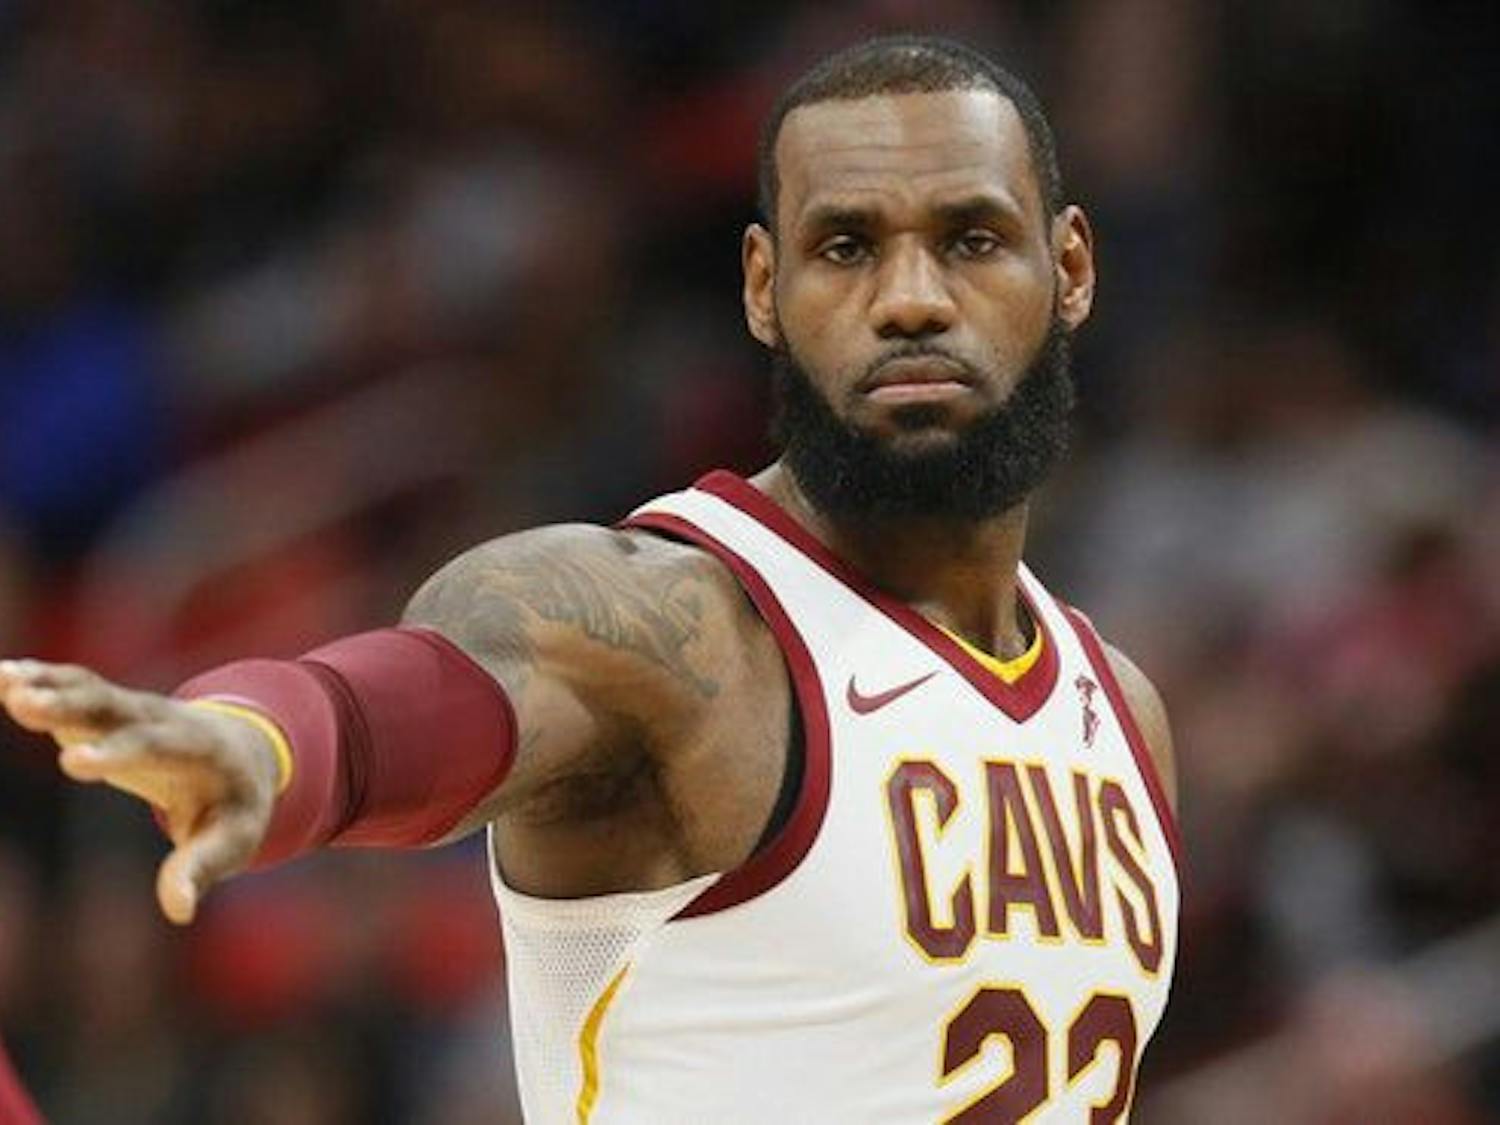 LeBron James is a better basketball player than Kevin Durant according to Andrew Huang, sports columnist.&nbsp;